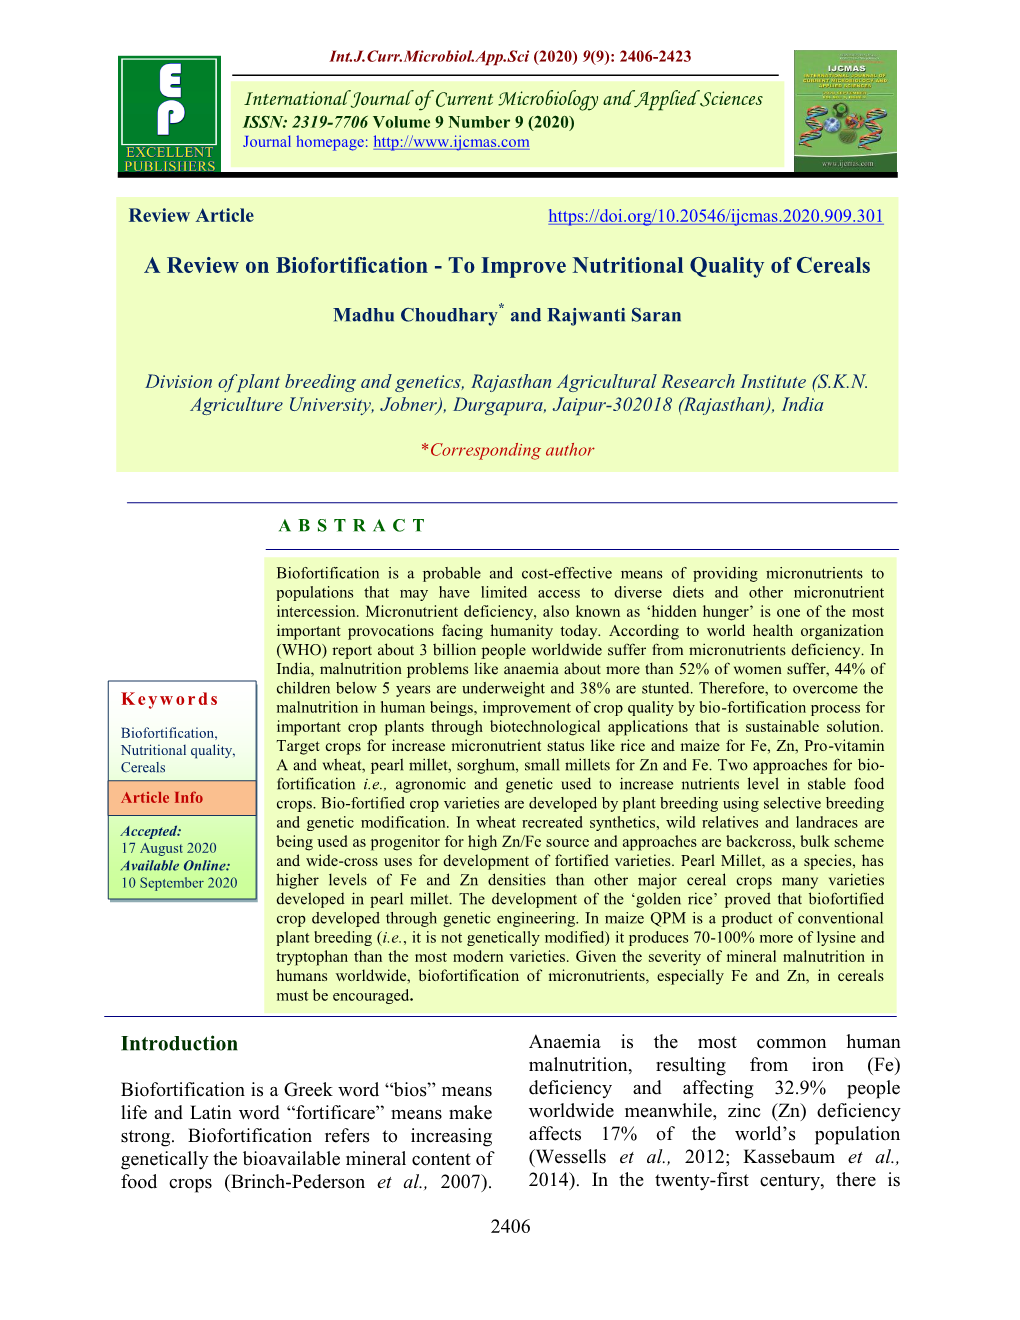 A Review on Biofortification - to Improve Nutritional Quality of Cereals